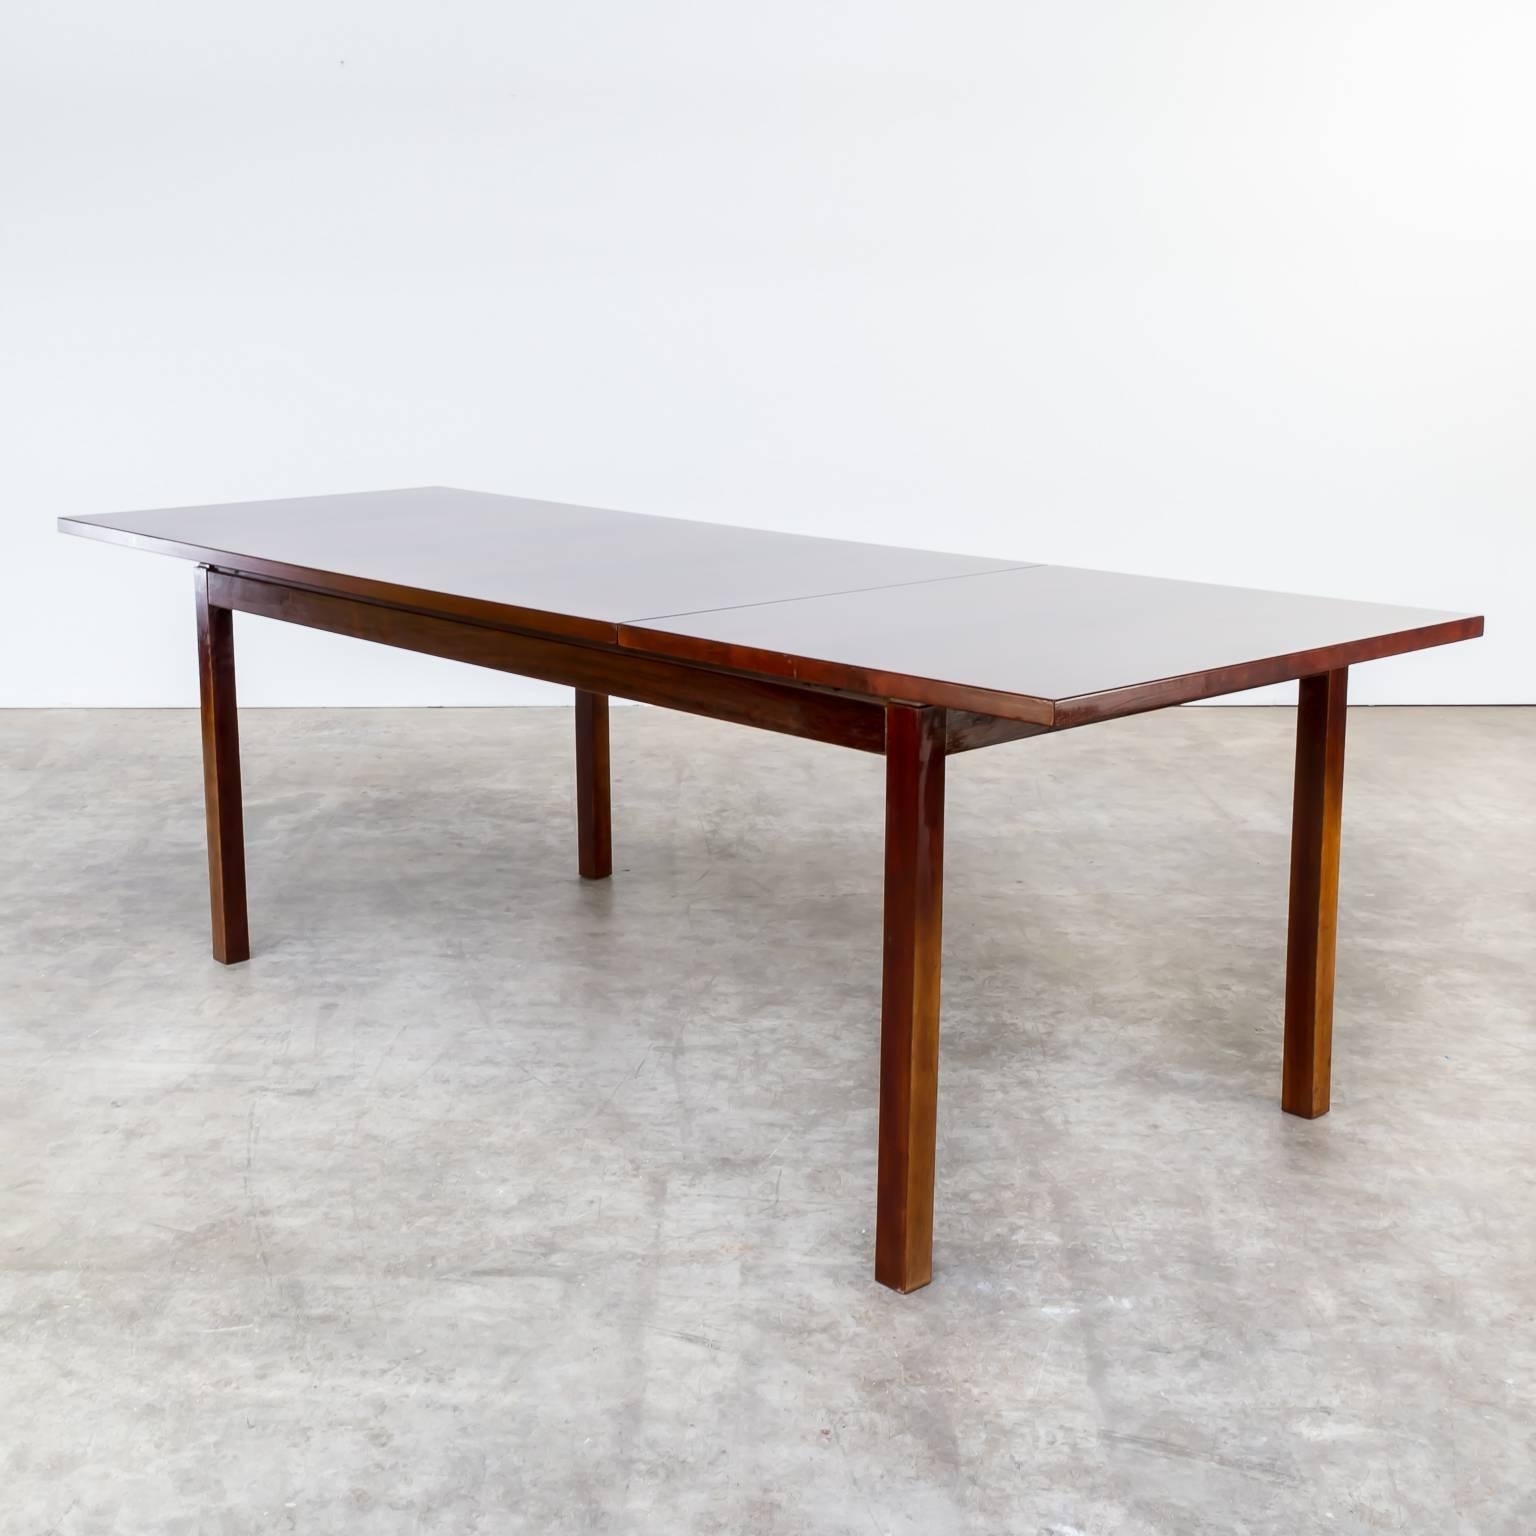 1970s Oswald Vermaercke rosewood dining table, extendable for V-form, Belgium. Beautiful and warm signing in the rosewood. Good condition, wear consistent with age and use. Dimensions: 168-240cm (W) x 90cm (D) x 75cm (H).